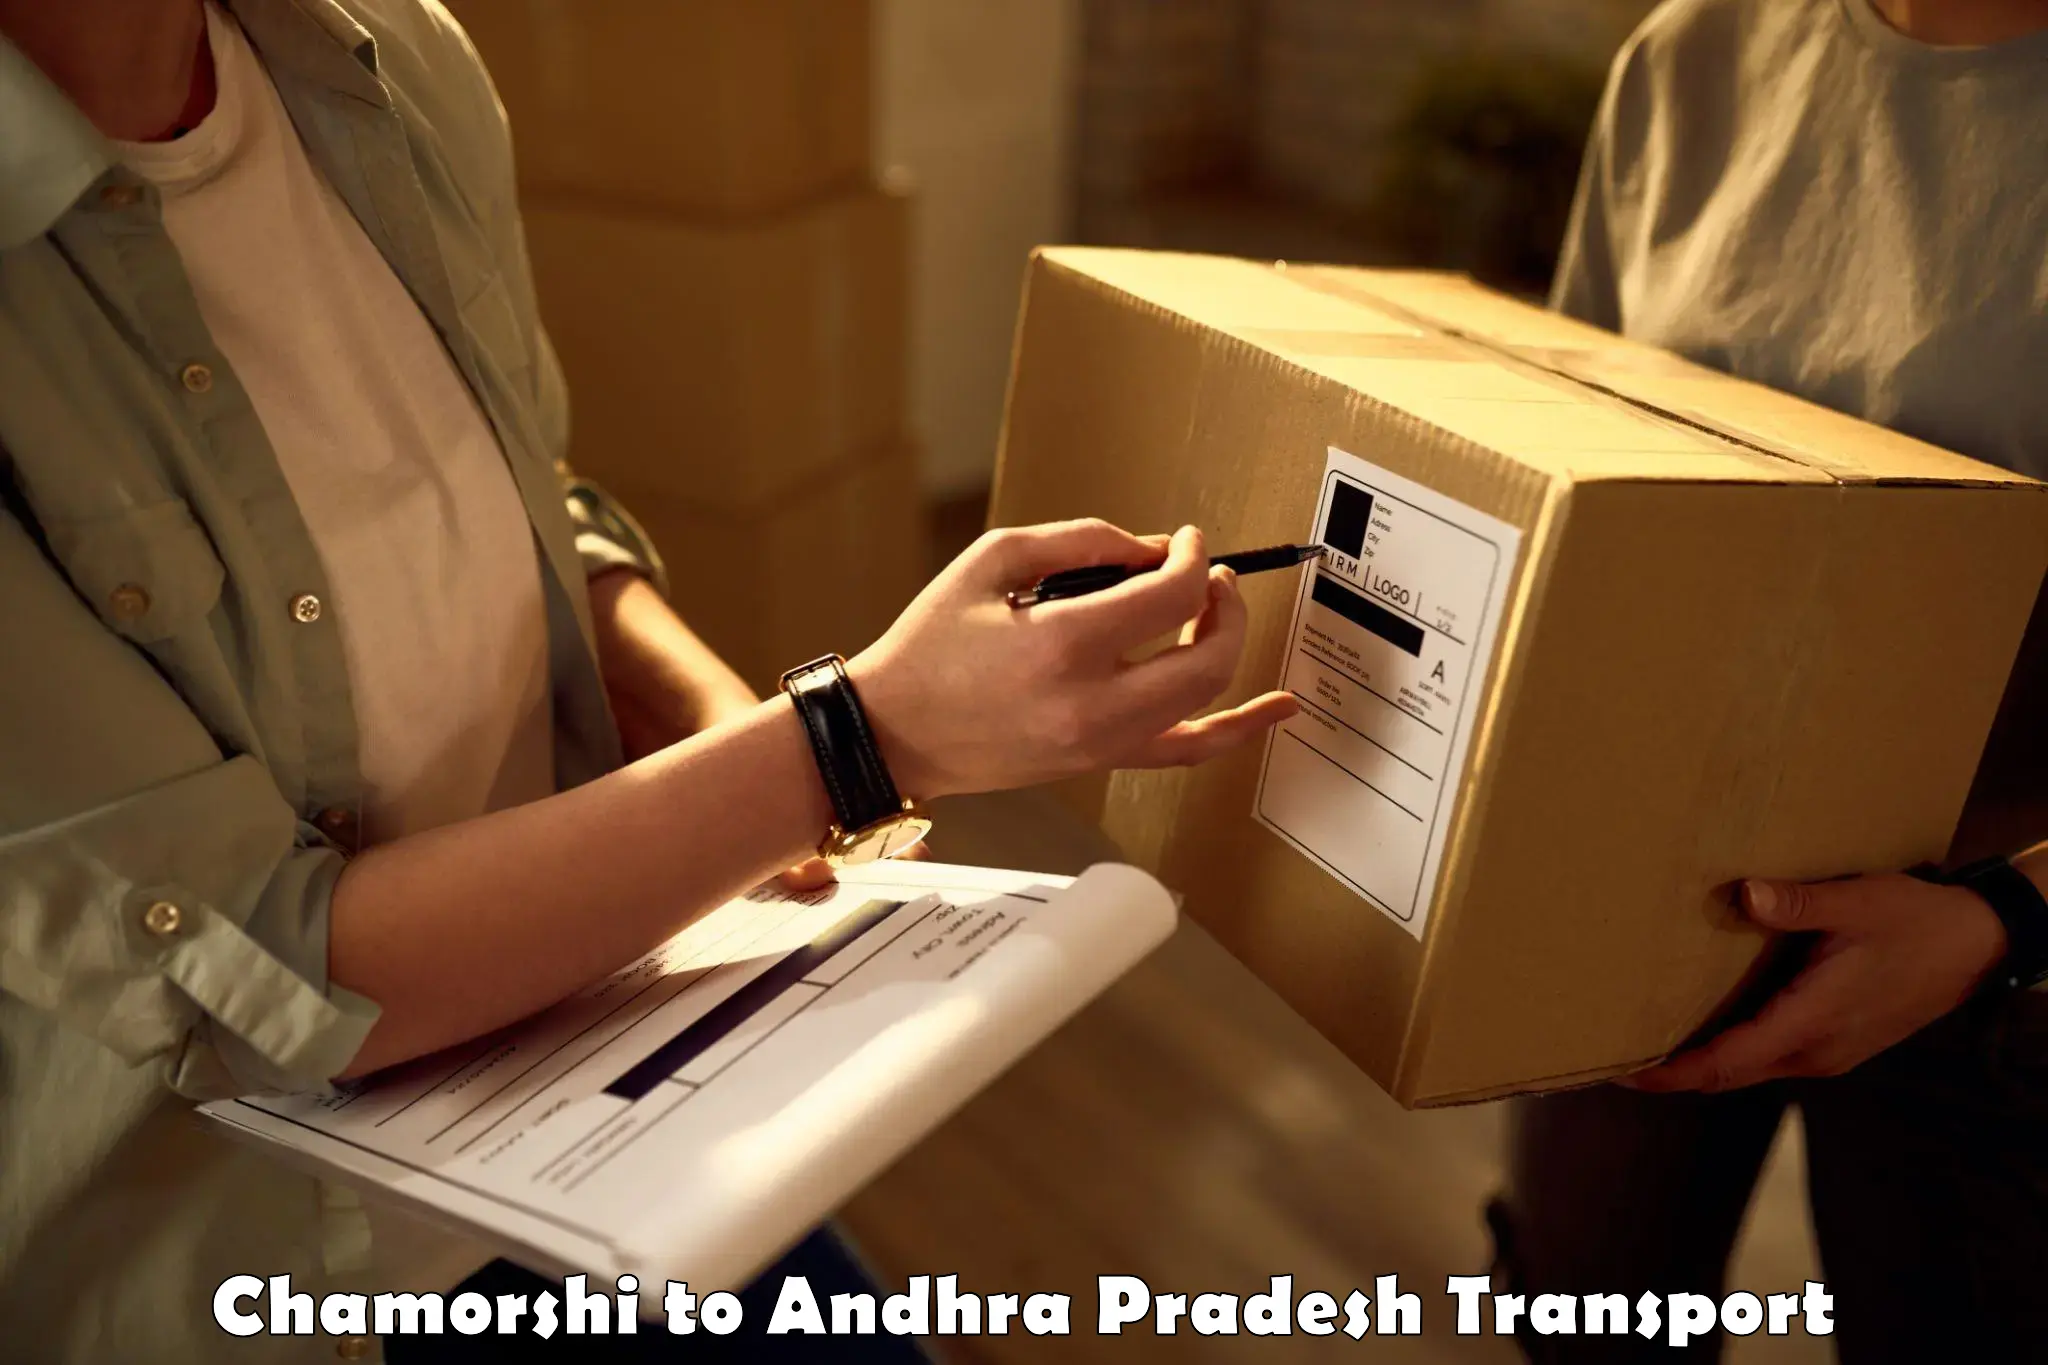 Truck transport companies in India Chamorshi to Anantapur